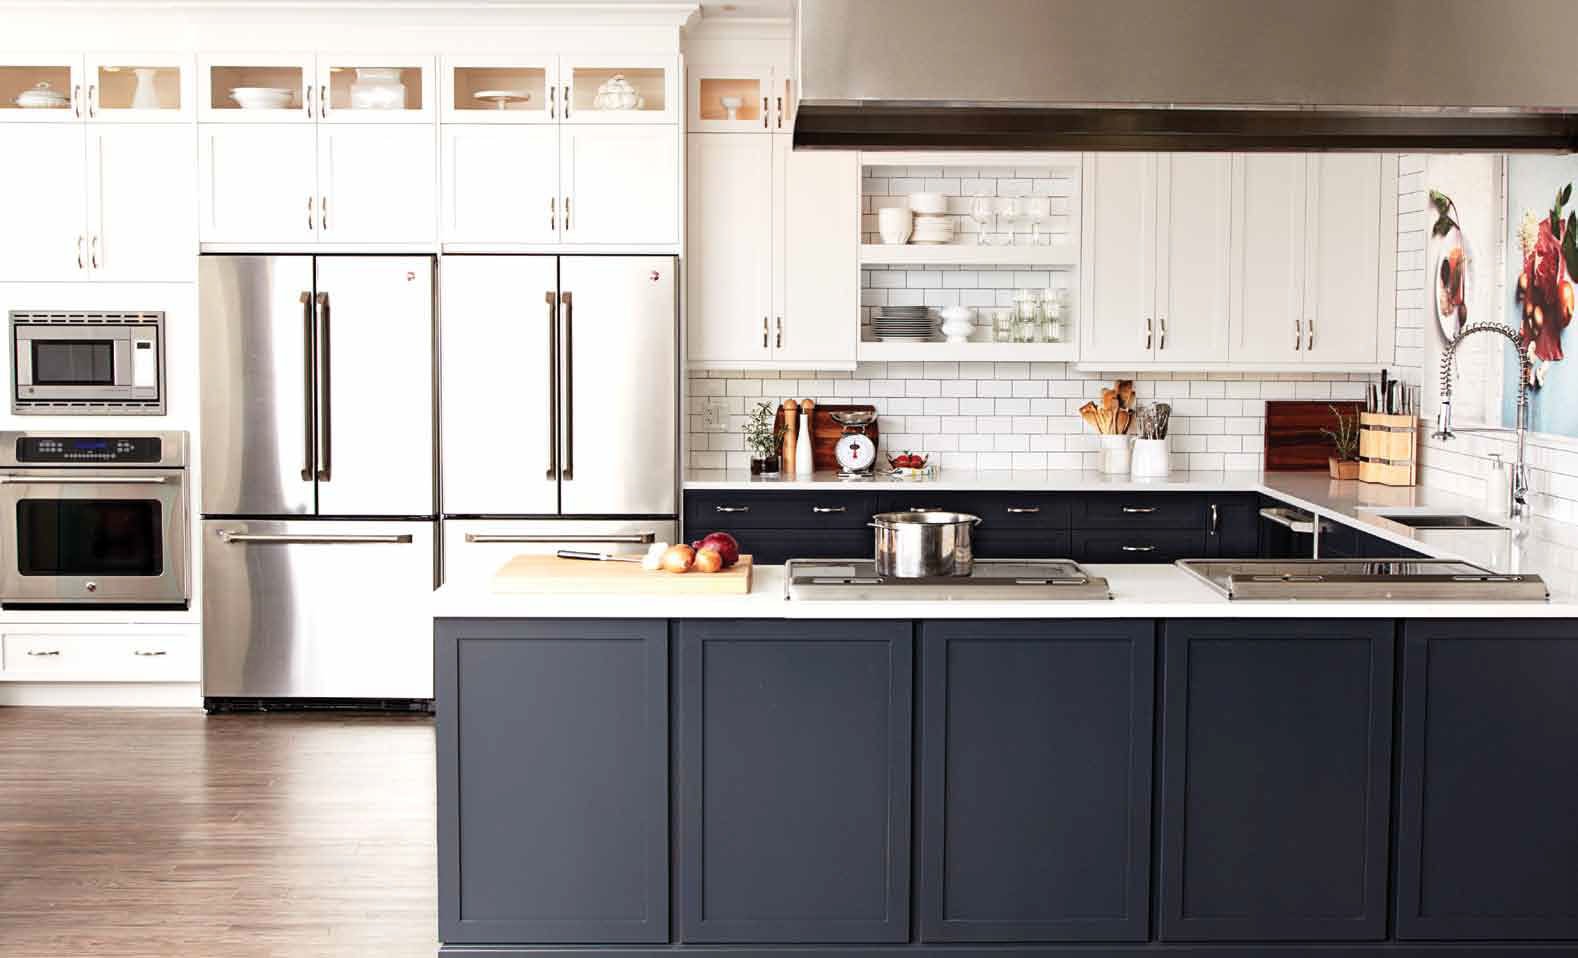 Watch the Chatelaine Kitchen get renovated (from start to finish) in under two minutes!